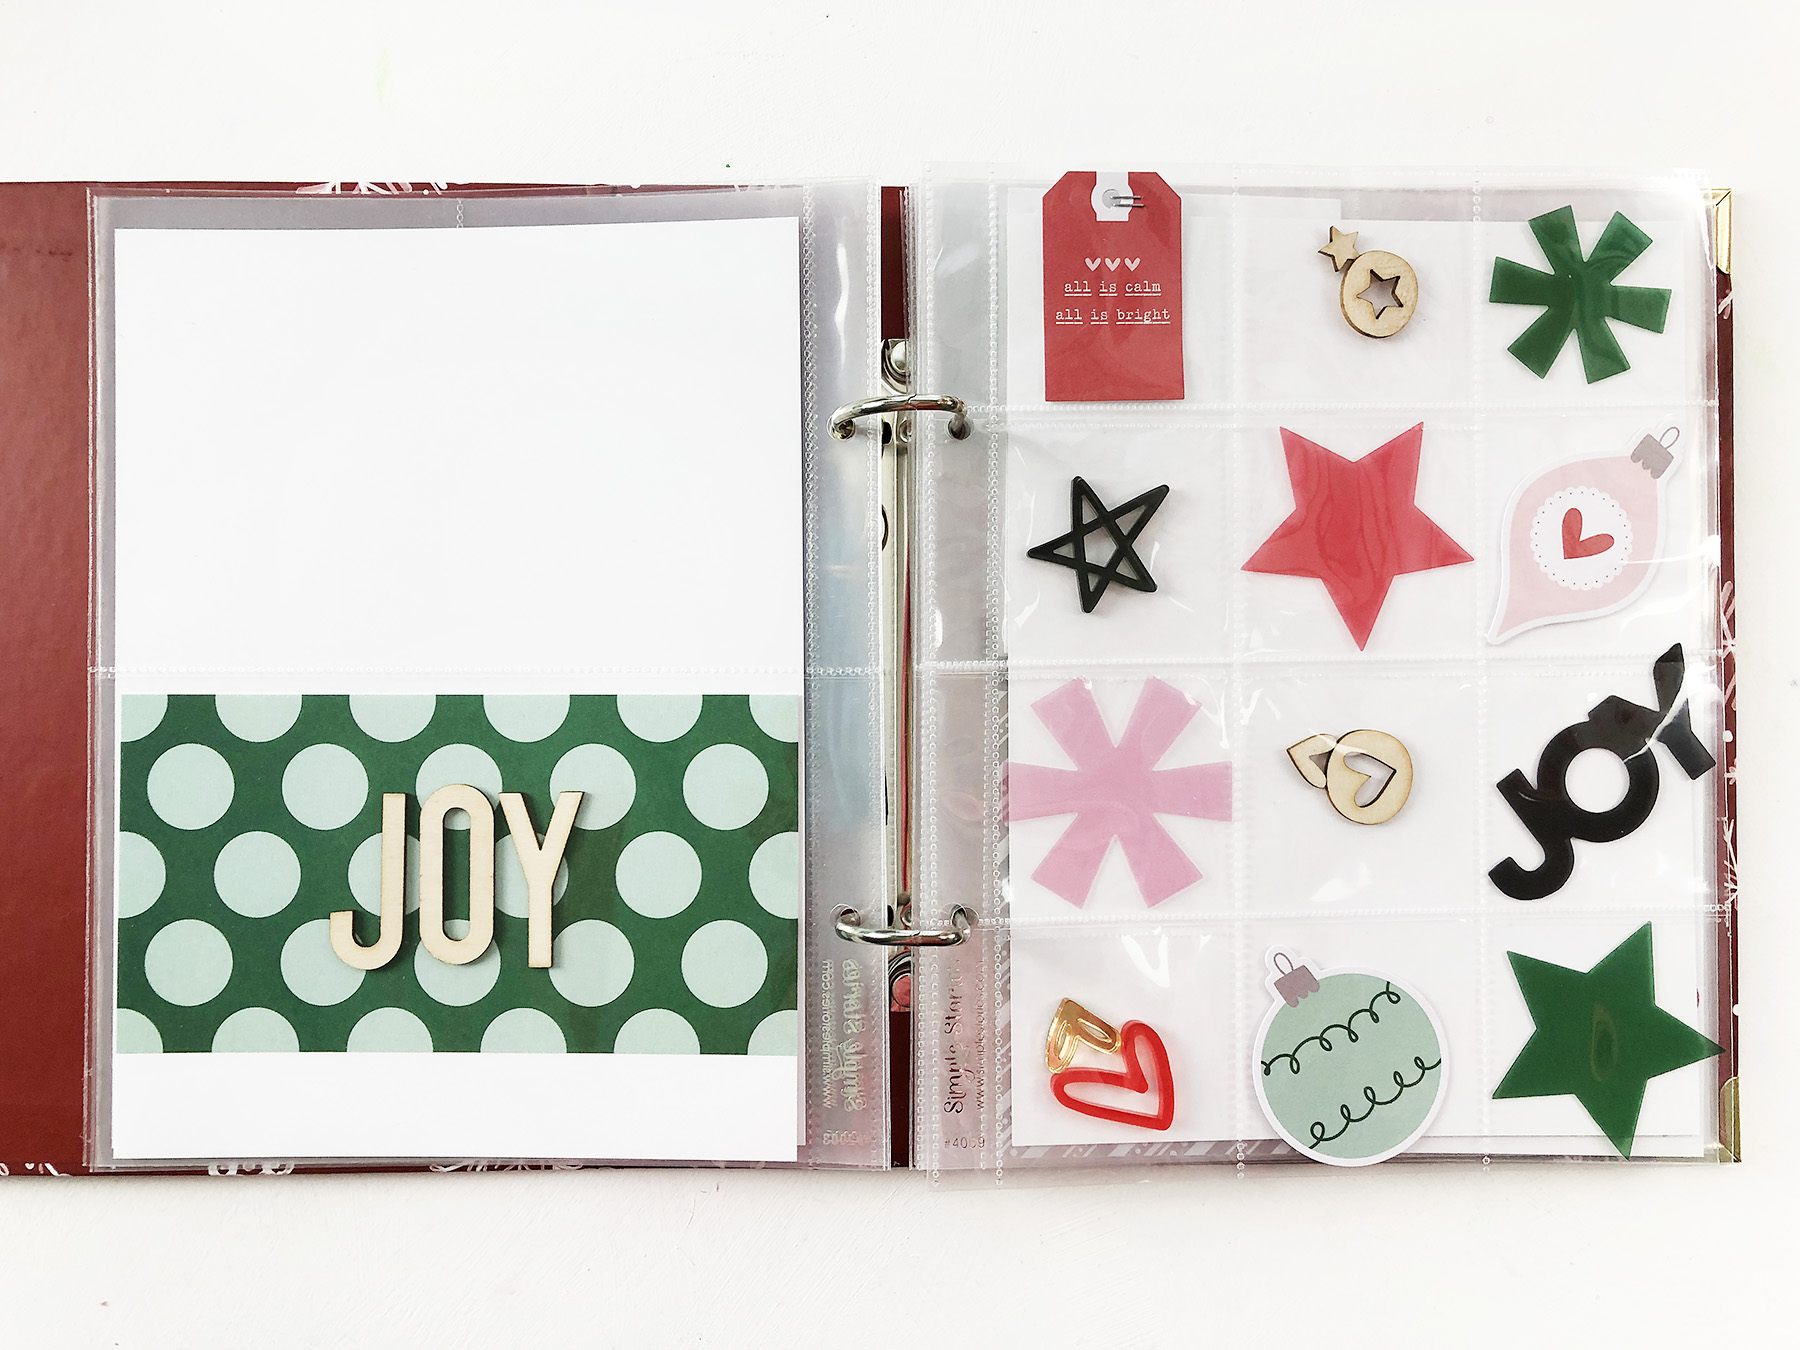 Scrappy Christmas In July | December Daily 2019 Days 4 Thru 6